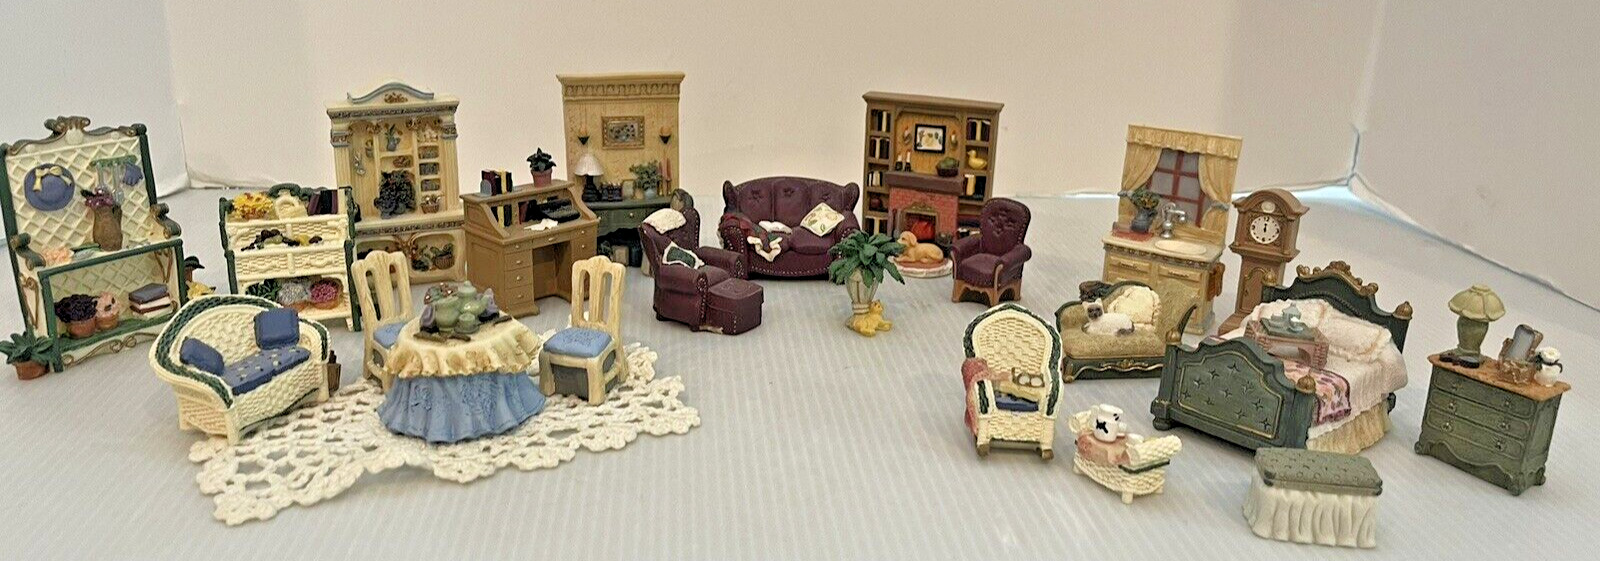 Miniature Furniture Collection Avon 22 Pc. Victorian Doll house set